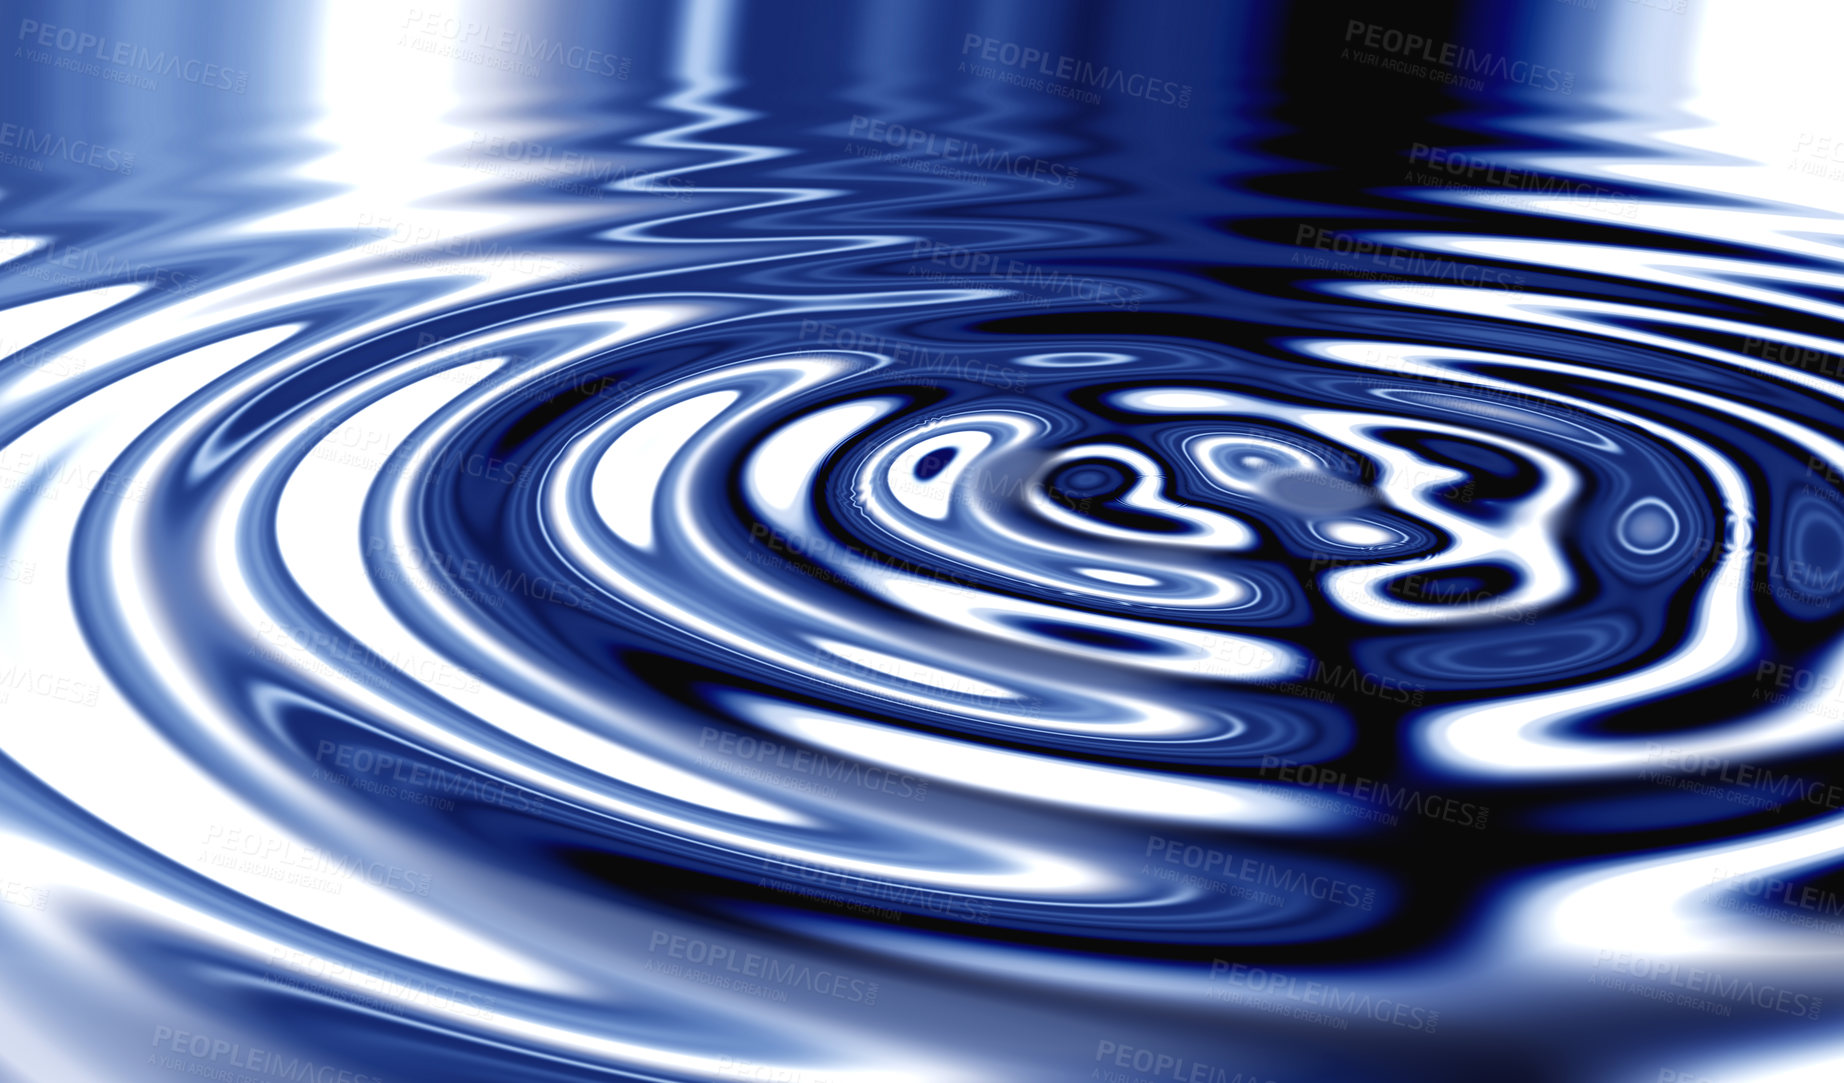 Buy stock photo Closeup Smoothly Animated 3d Cgi silver shiny waves making ripples in liquid blue color substance. Shiny graphic of a glowing silver color water or fluid with a shining reflection on the surface